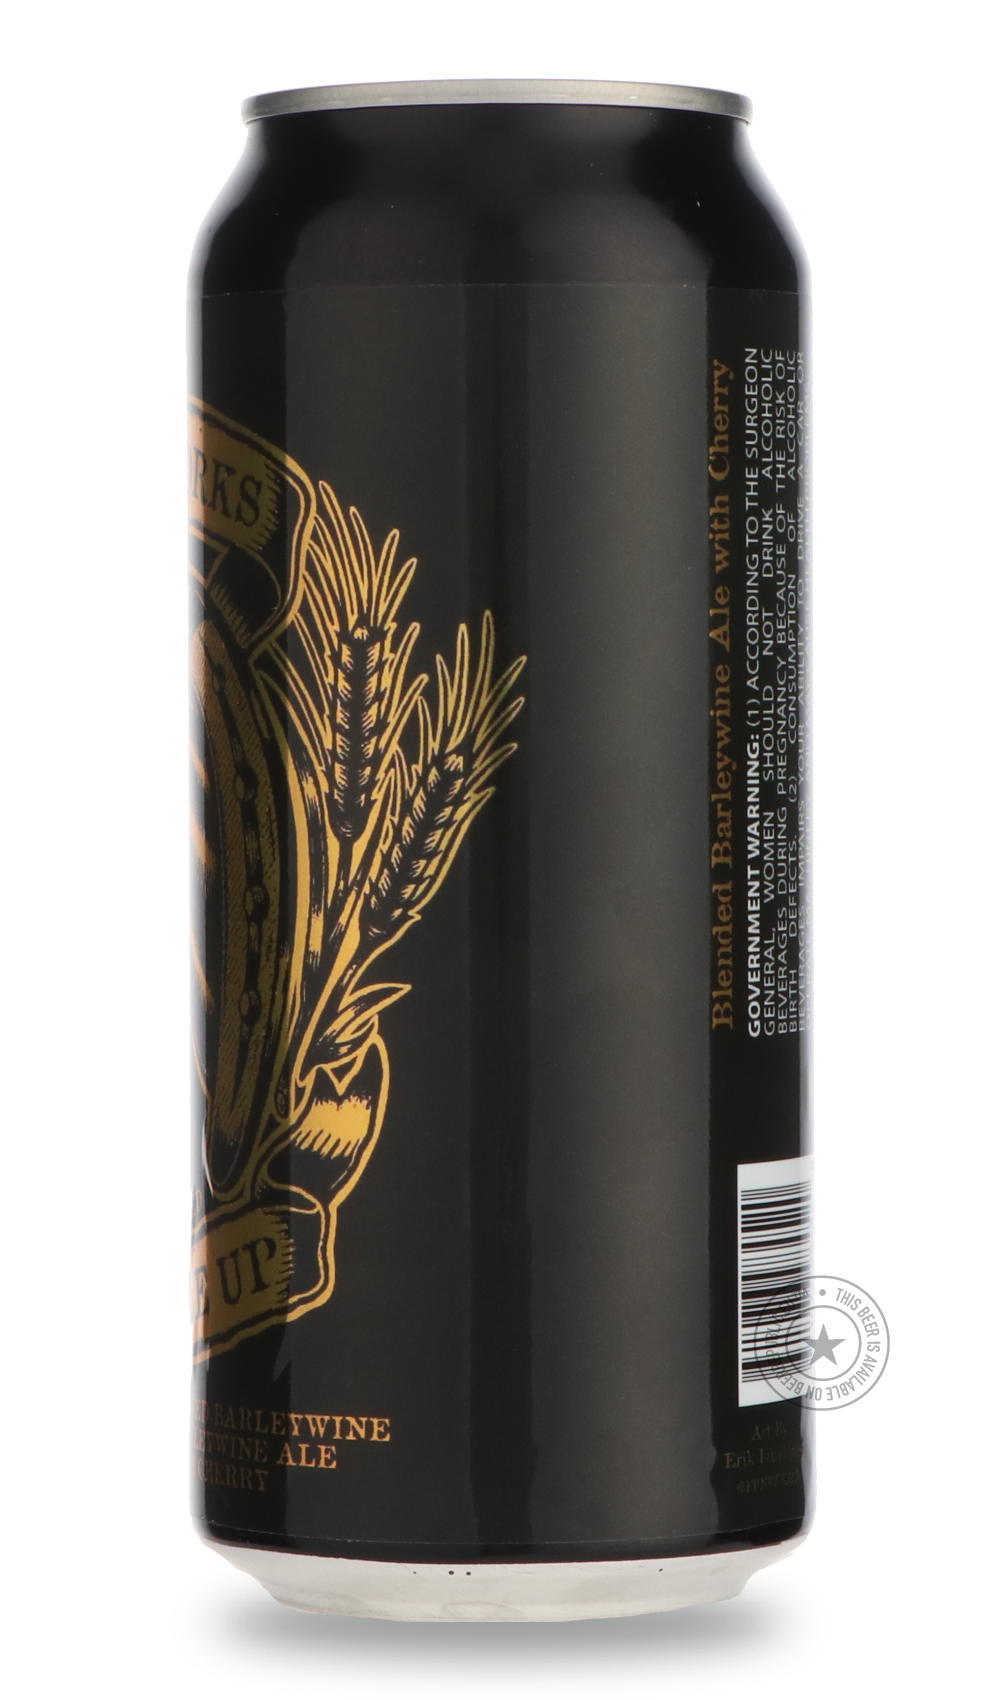 -Pipeworks- Barrel Aged Saddle Up-Brown & Dark- Only @ Beer Republic - The best online beer store for American & Canadian craft beer - Buy beer online from the USA and Canada - Bier online kopen - Amerikaans bier kopen - Craft beer store - Craft beer kopen - Amerikanisch bier kaufen - Bier online kaufen - Acheter biere online - IPA - Stout - Porter - New England IPA - Hazy IPA - Imperial Stout - Barrel Aged - Barrel Aged Imperial Stout - Brown - Dark beer - Blond - Blonde - Pilsner - Lager - Wheat - Weizen 